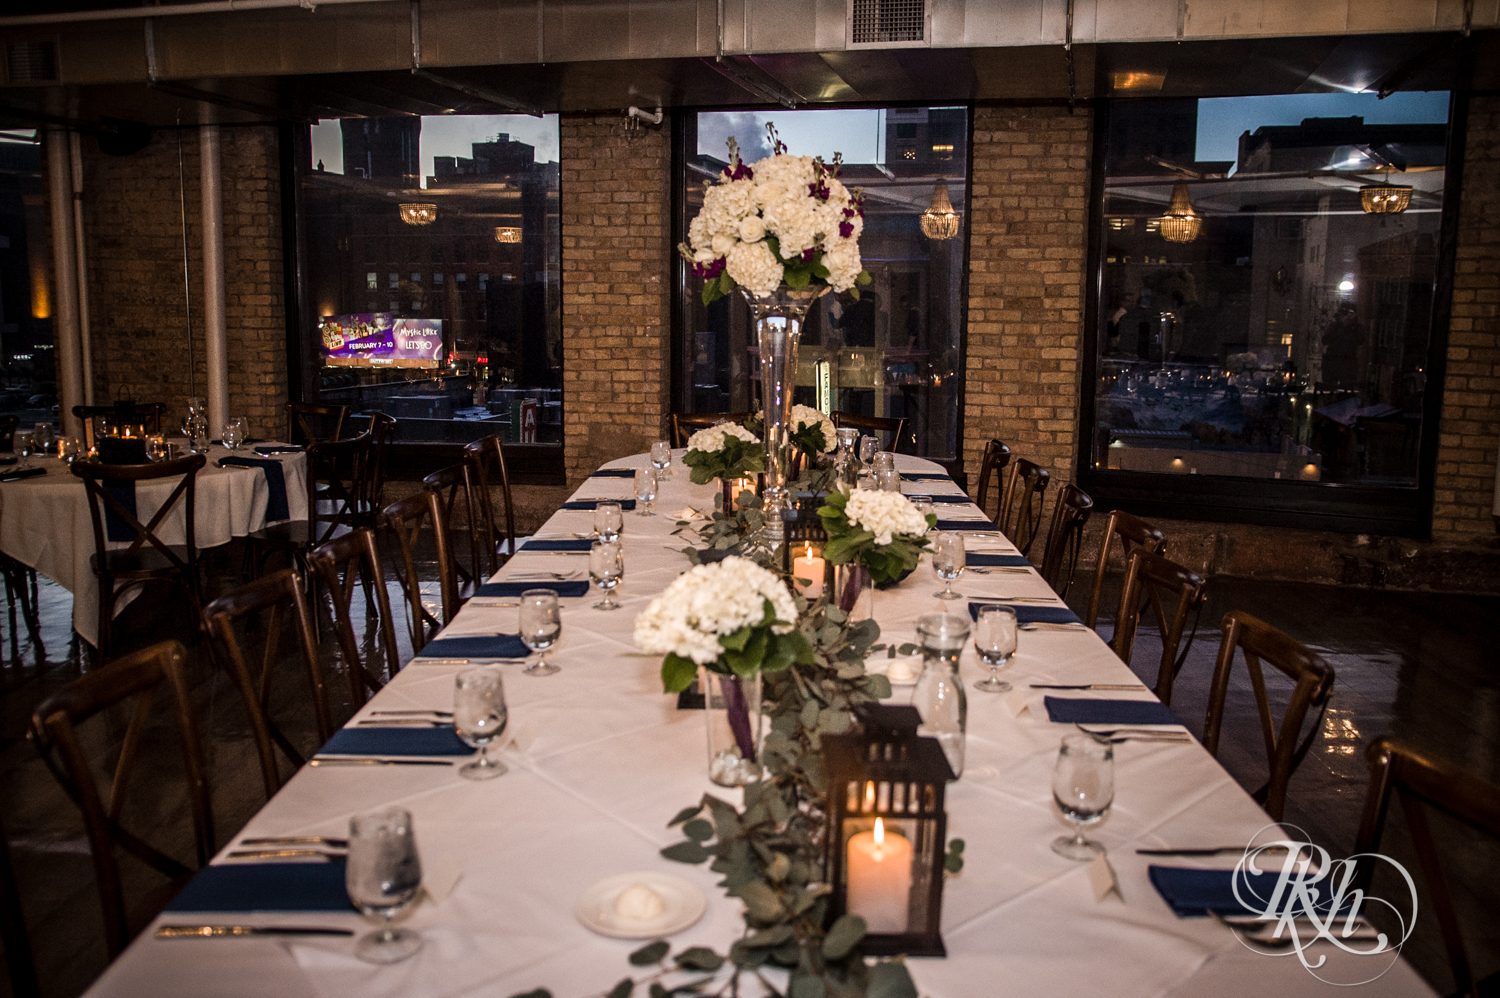 Indoor candlelit wedding reception setup at the Lumber Exchange Event Center in Minneapolis, Minnesota.